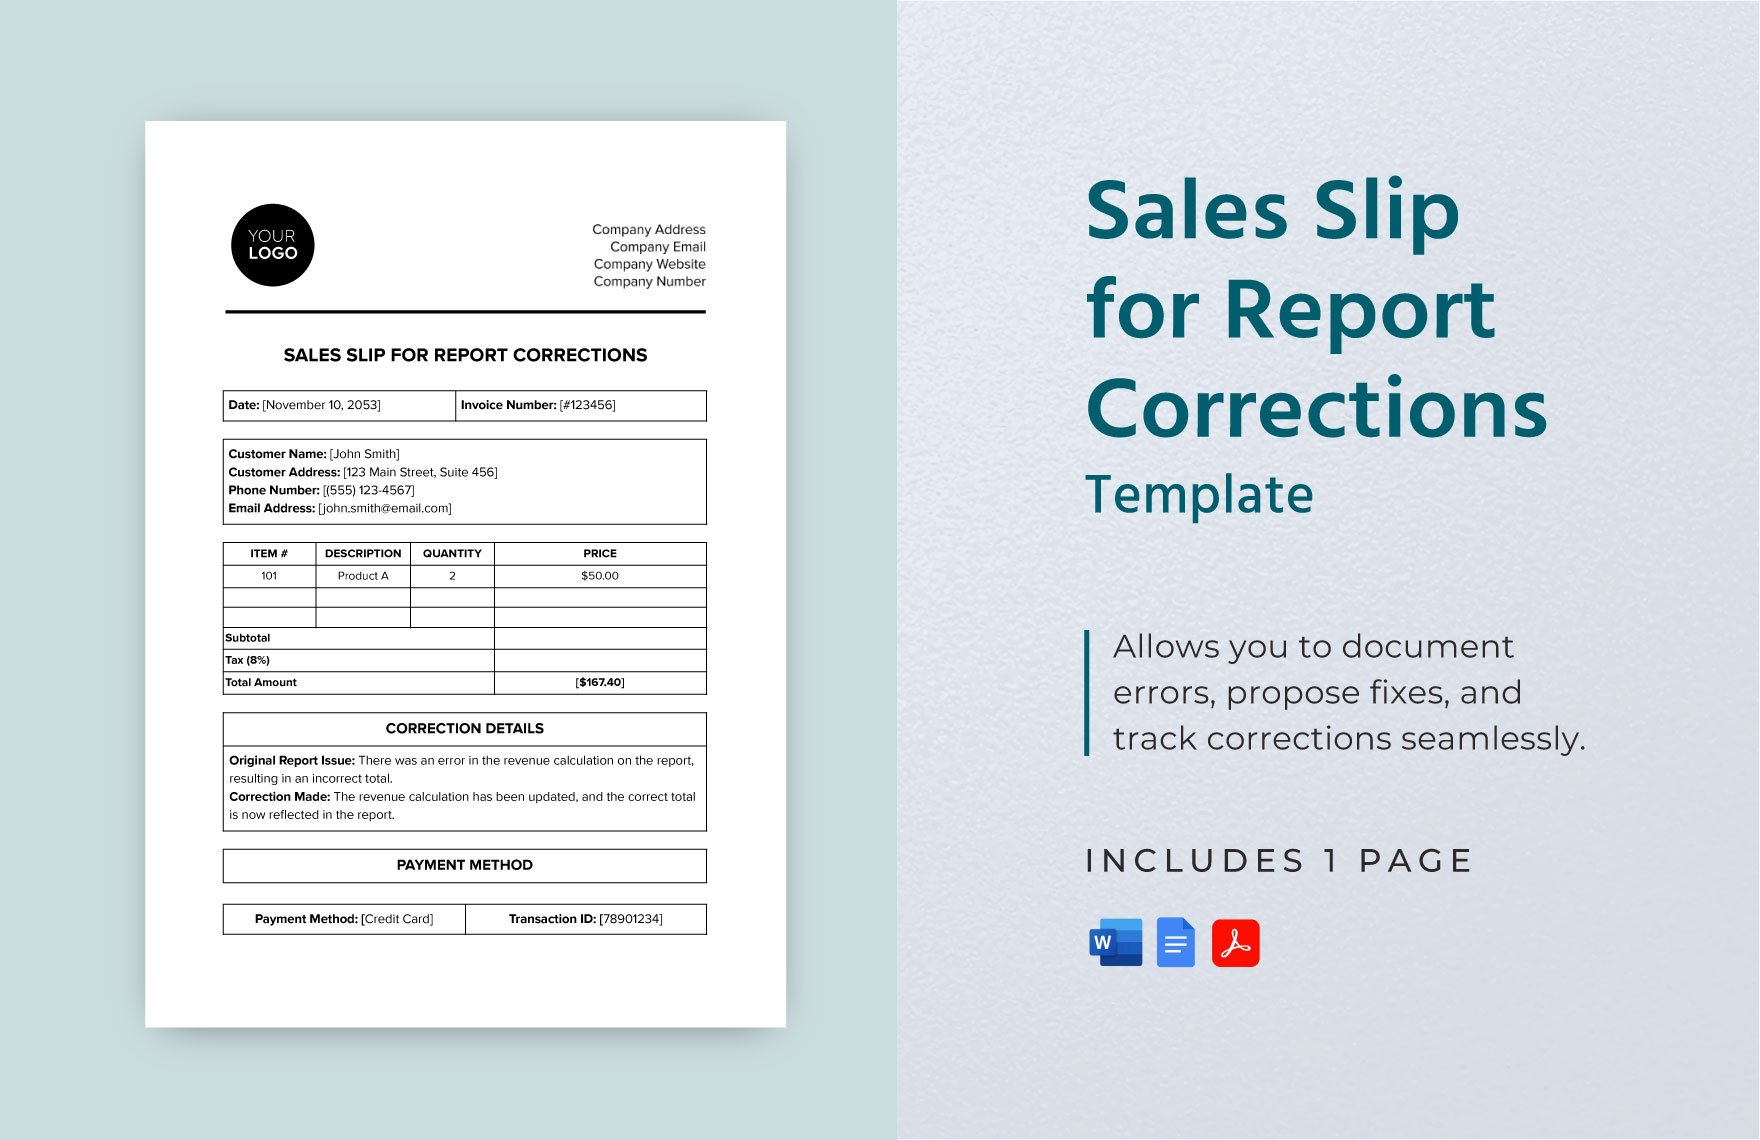 Sales Slip for Report Corrections Template